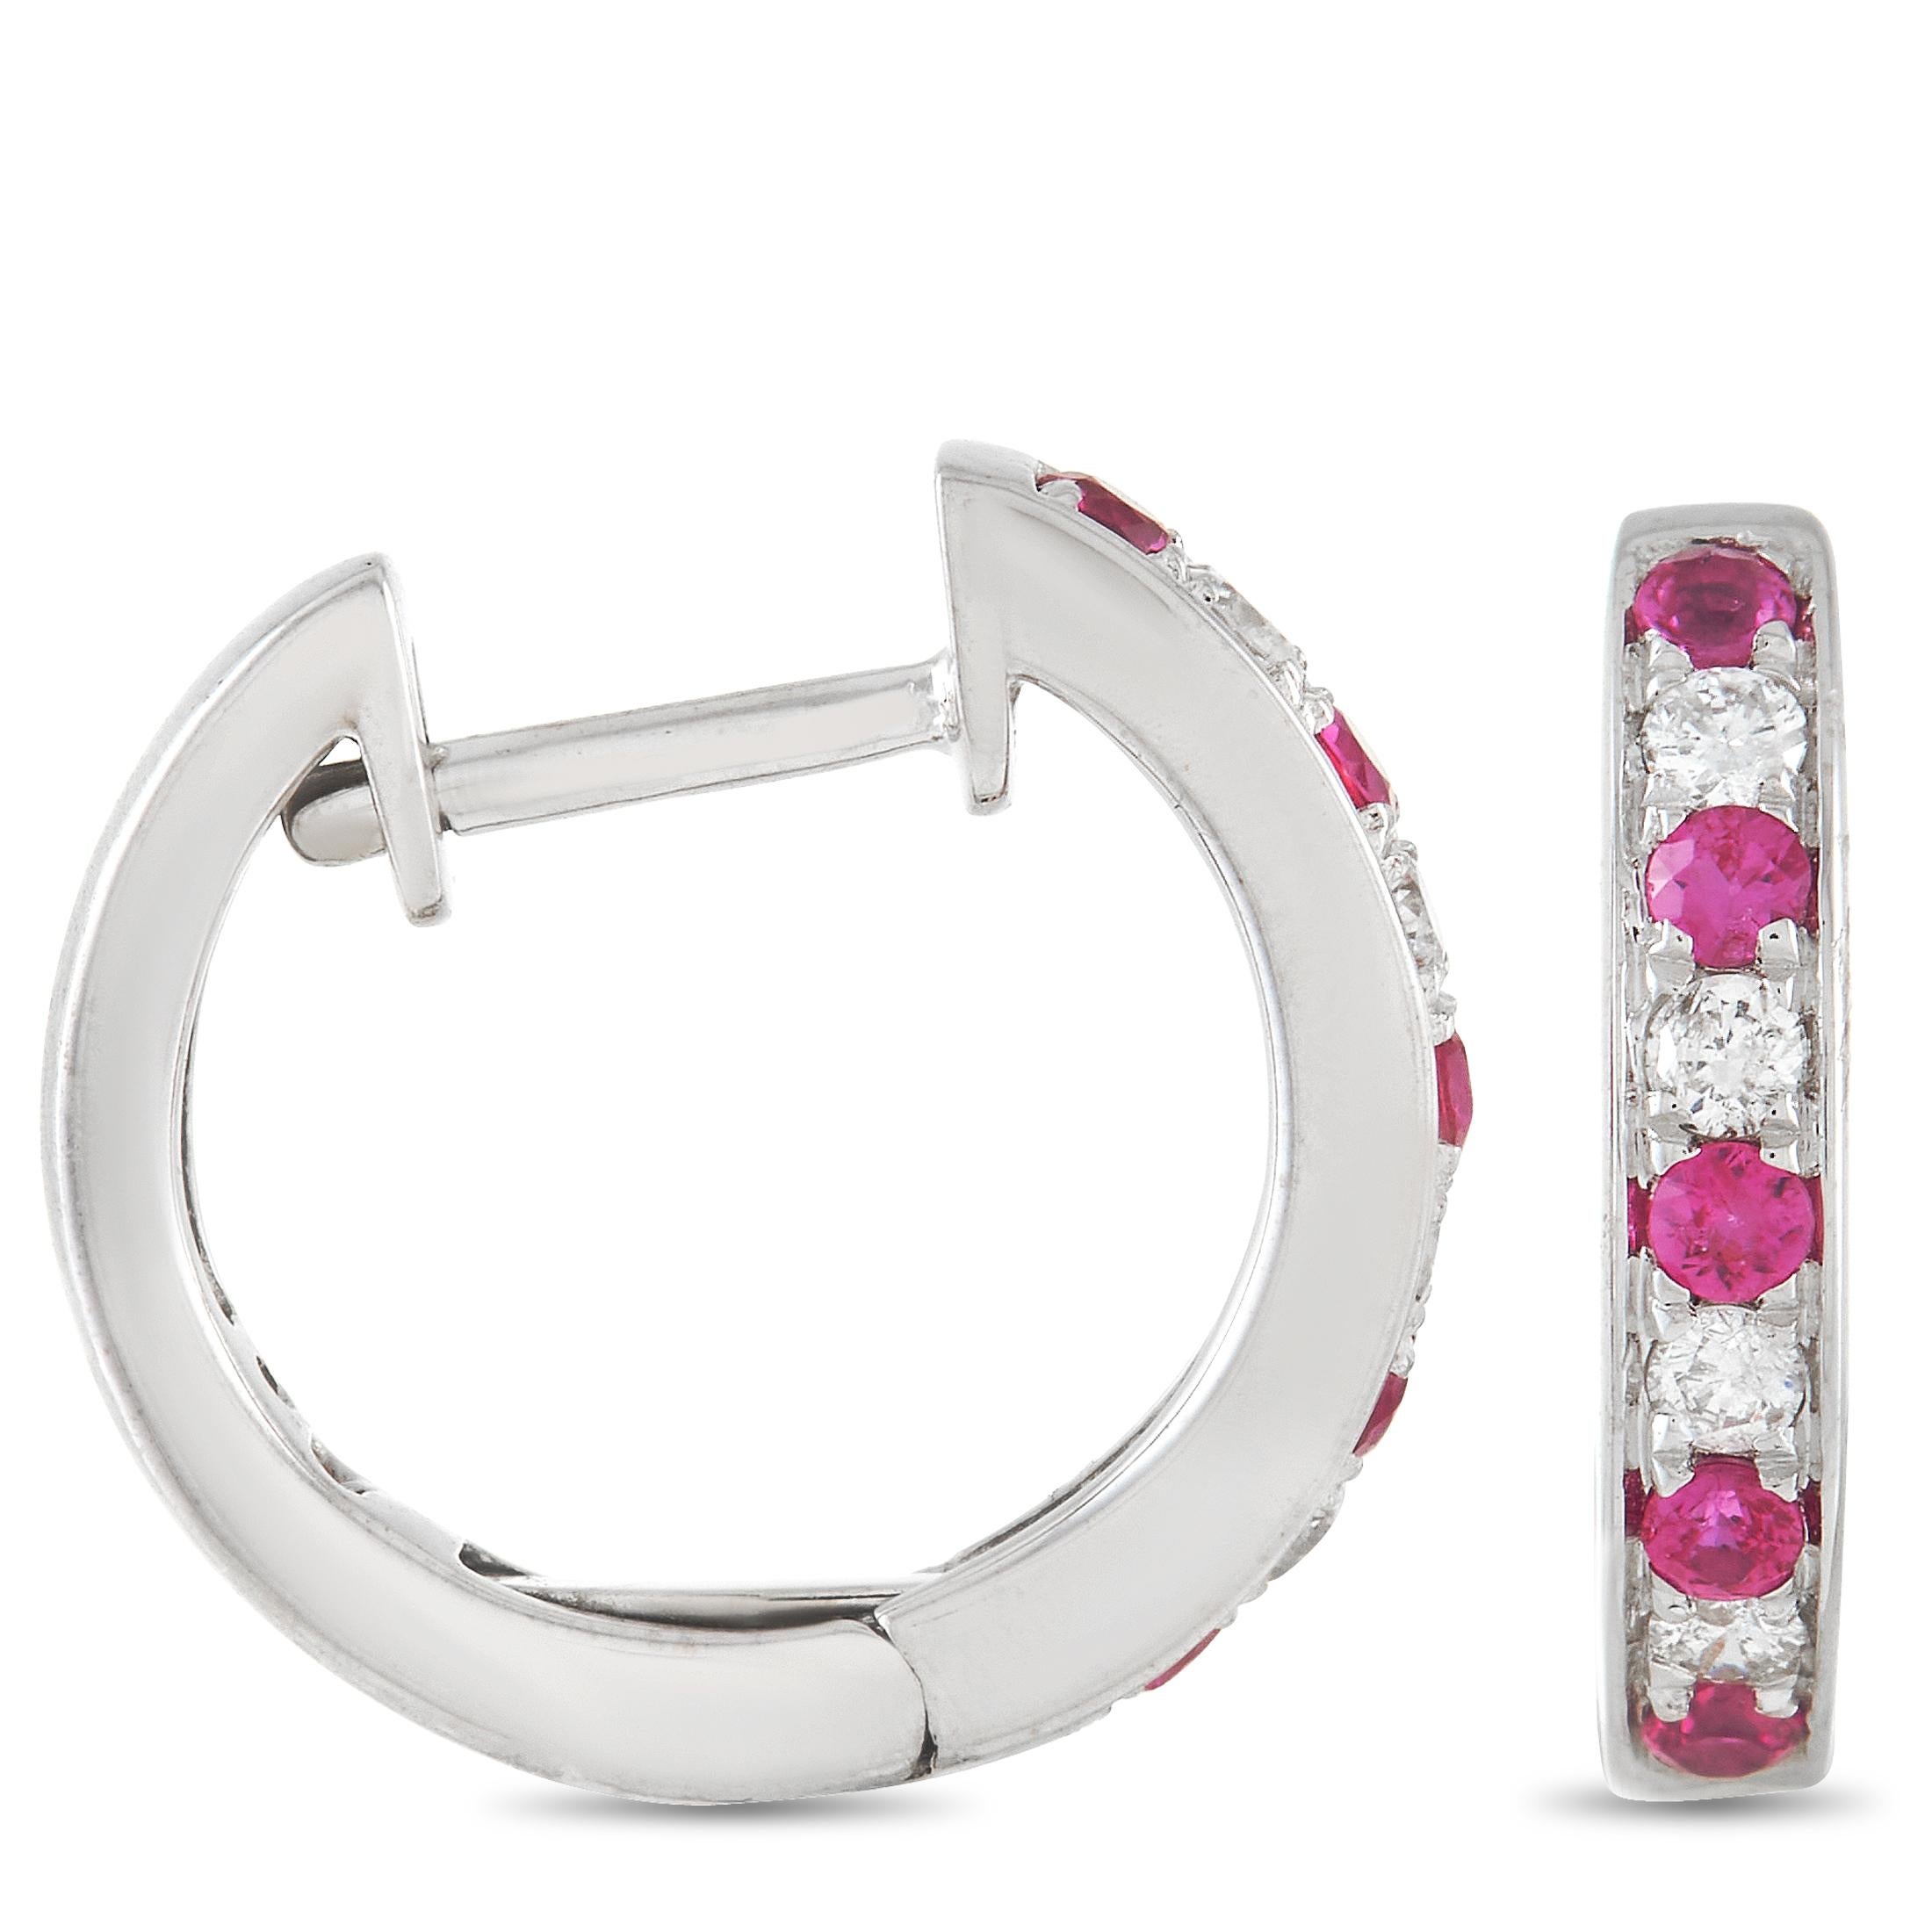 These glamourous LB Exclusive 14K White Gold 0.15 ct Diamond 0.25 ct Ruby Hoop Earrings are made with 14K white gold and are set with 0.15 carats of round-cut diamonds and 0.25 carats of round cut rubies set in a single row along the face of each